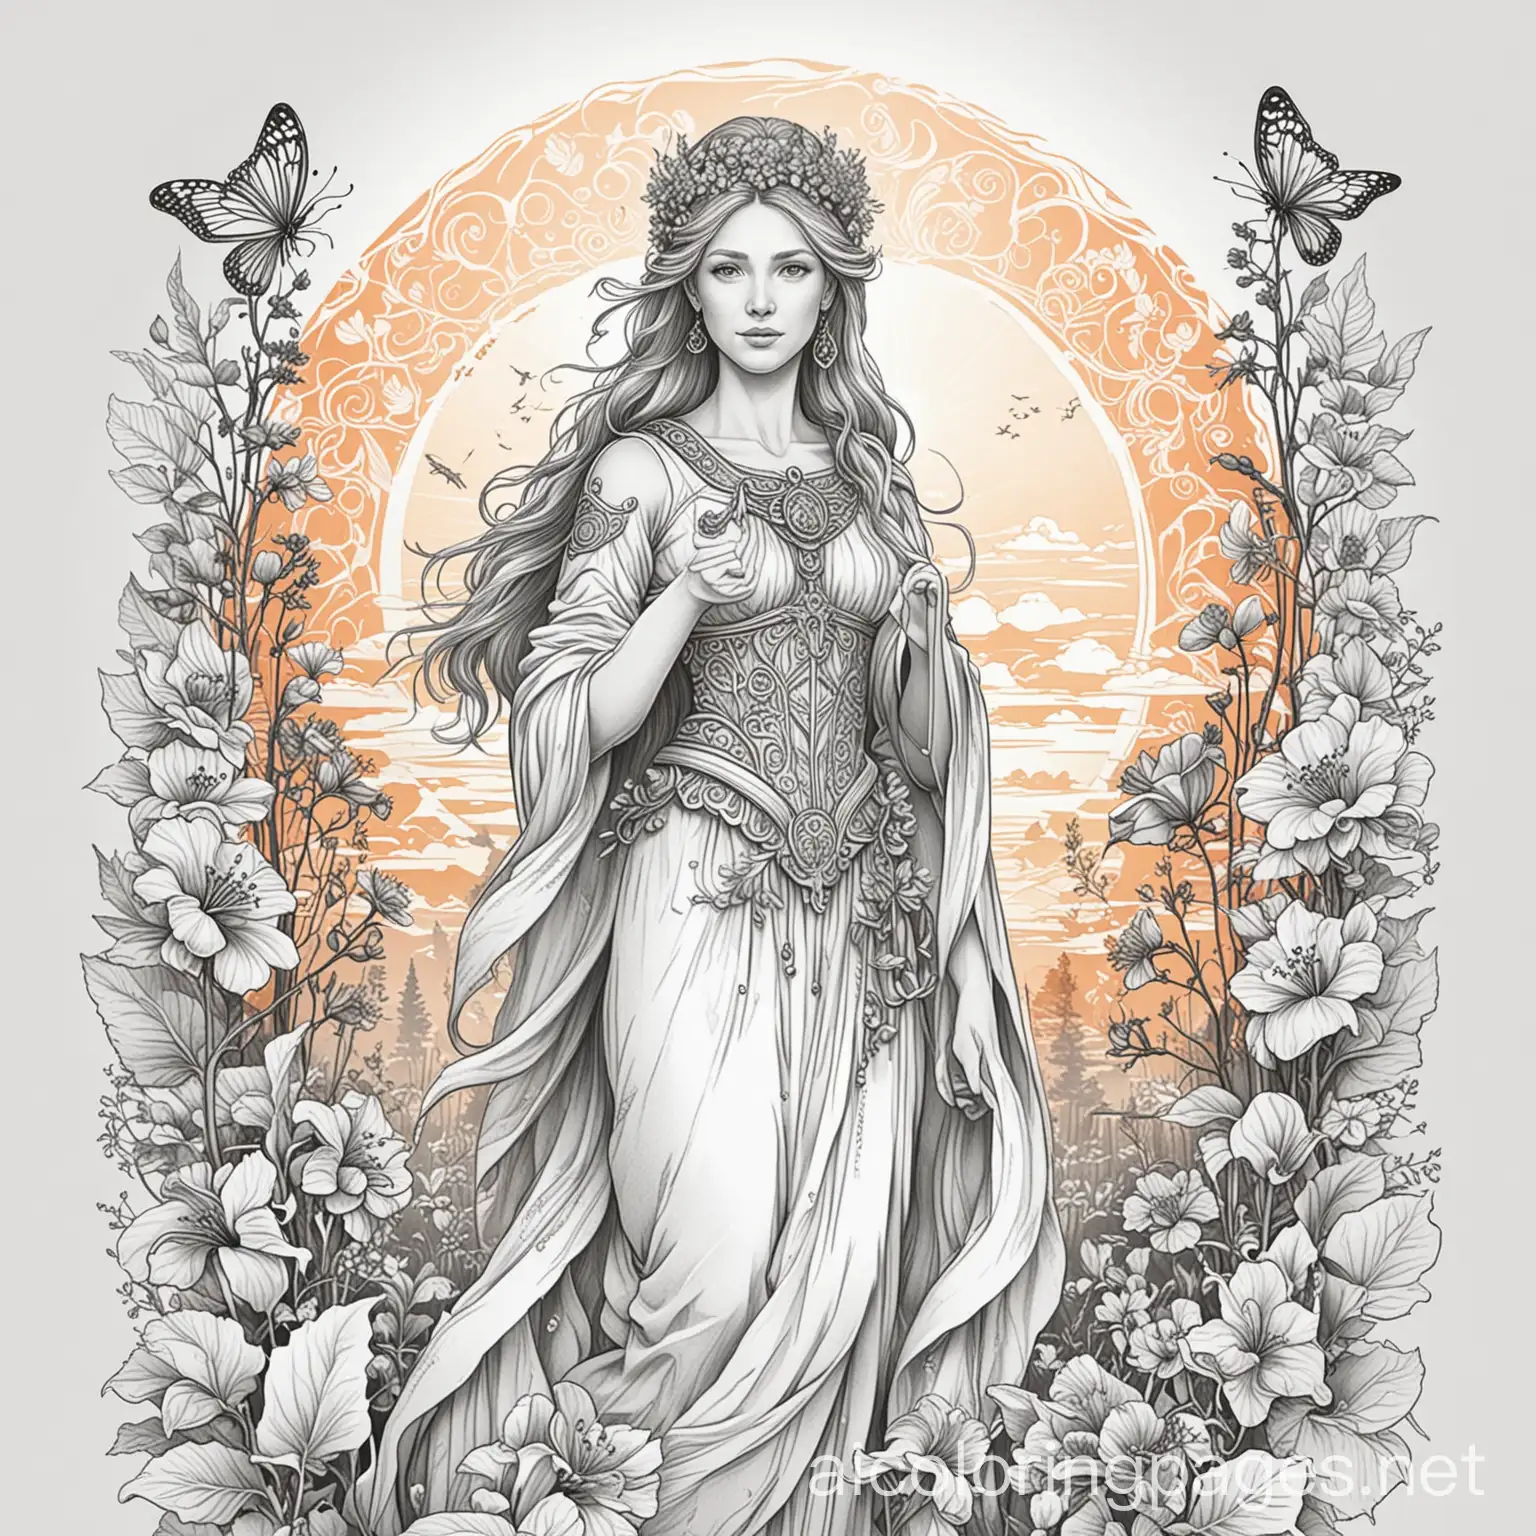 Create a dynamic tall vector image of Finnish goddess Paivatar standing in front of a radiant sunrise. Blooming flowers and vines with honeybees, and the sunlight is fiery. Traditional Finnish art style. Black and white outline on white background. Dynamic and beautiful style. Symbols, animals, and plants associated with her. High detail and crisp outlines. Fantasy illustration., Coloring Page, black and white, line art, white background, Simplicity, Ample White Space. The background of the coloring page is plain white to make it easy for young children to color within the lines. The outlines of all the subjects are easy to distinguish, making it simple for kids to color without too much difficulty